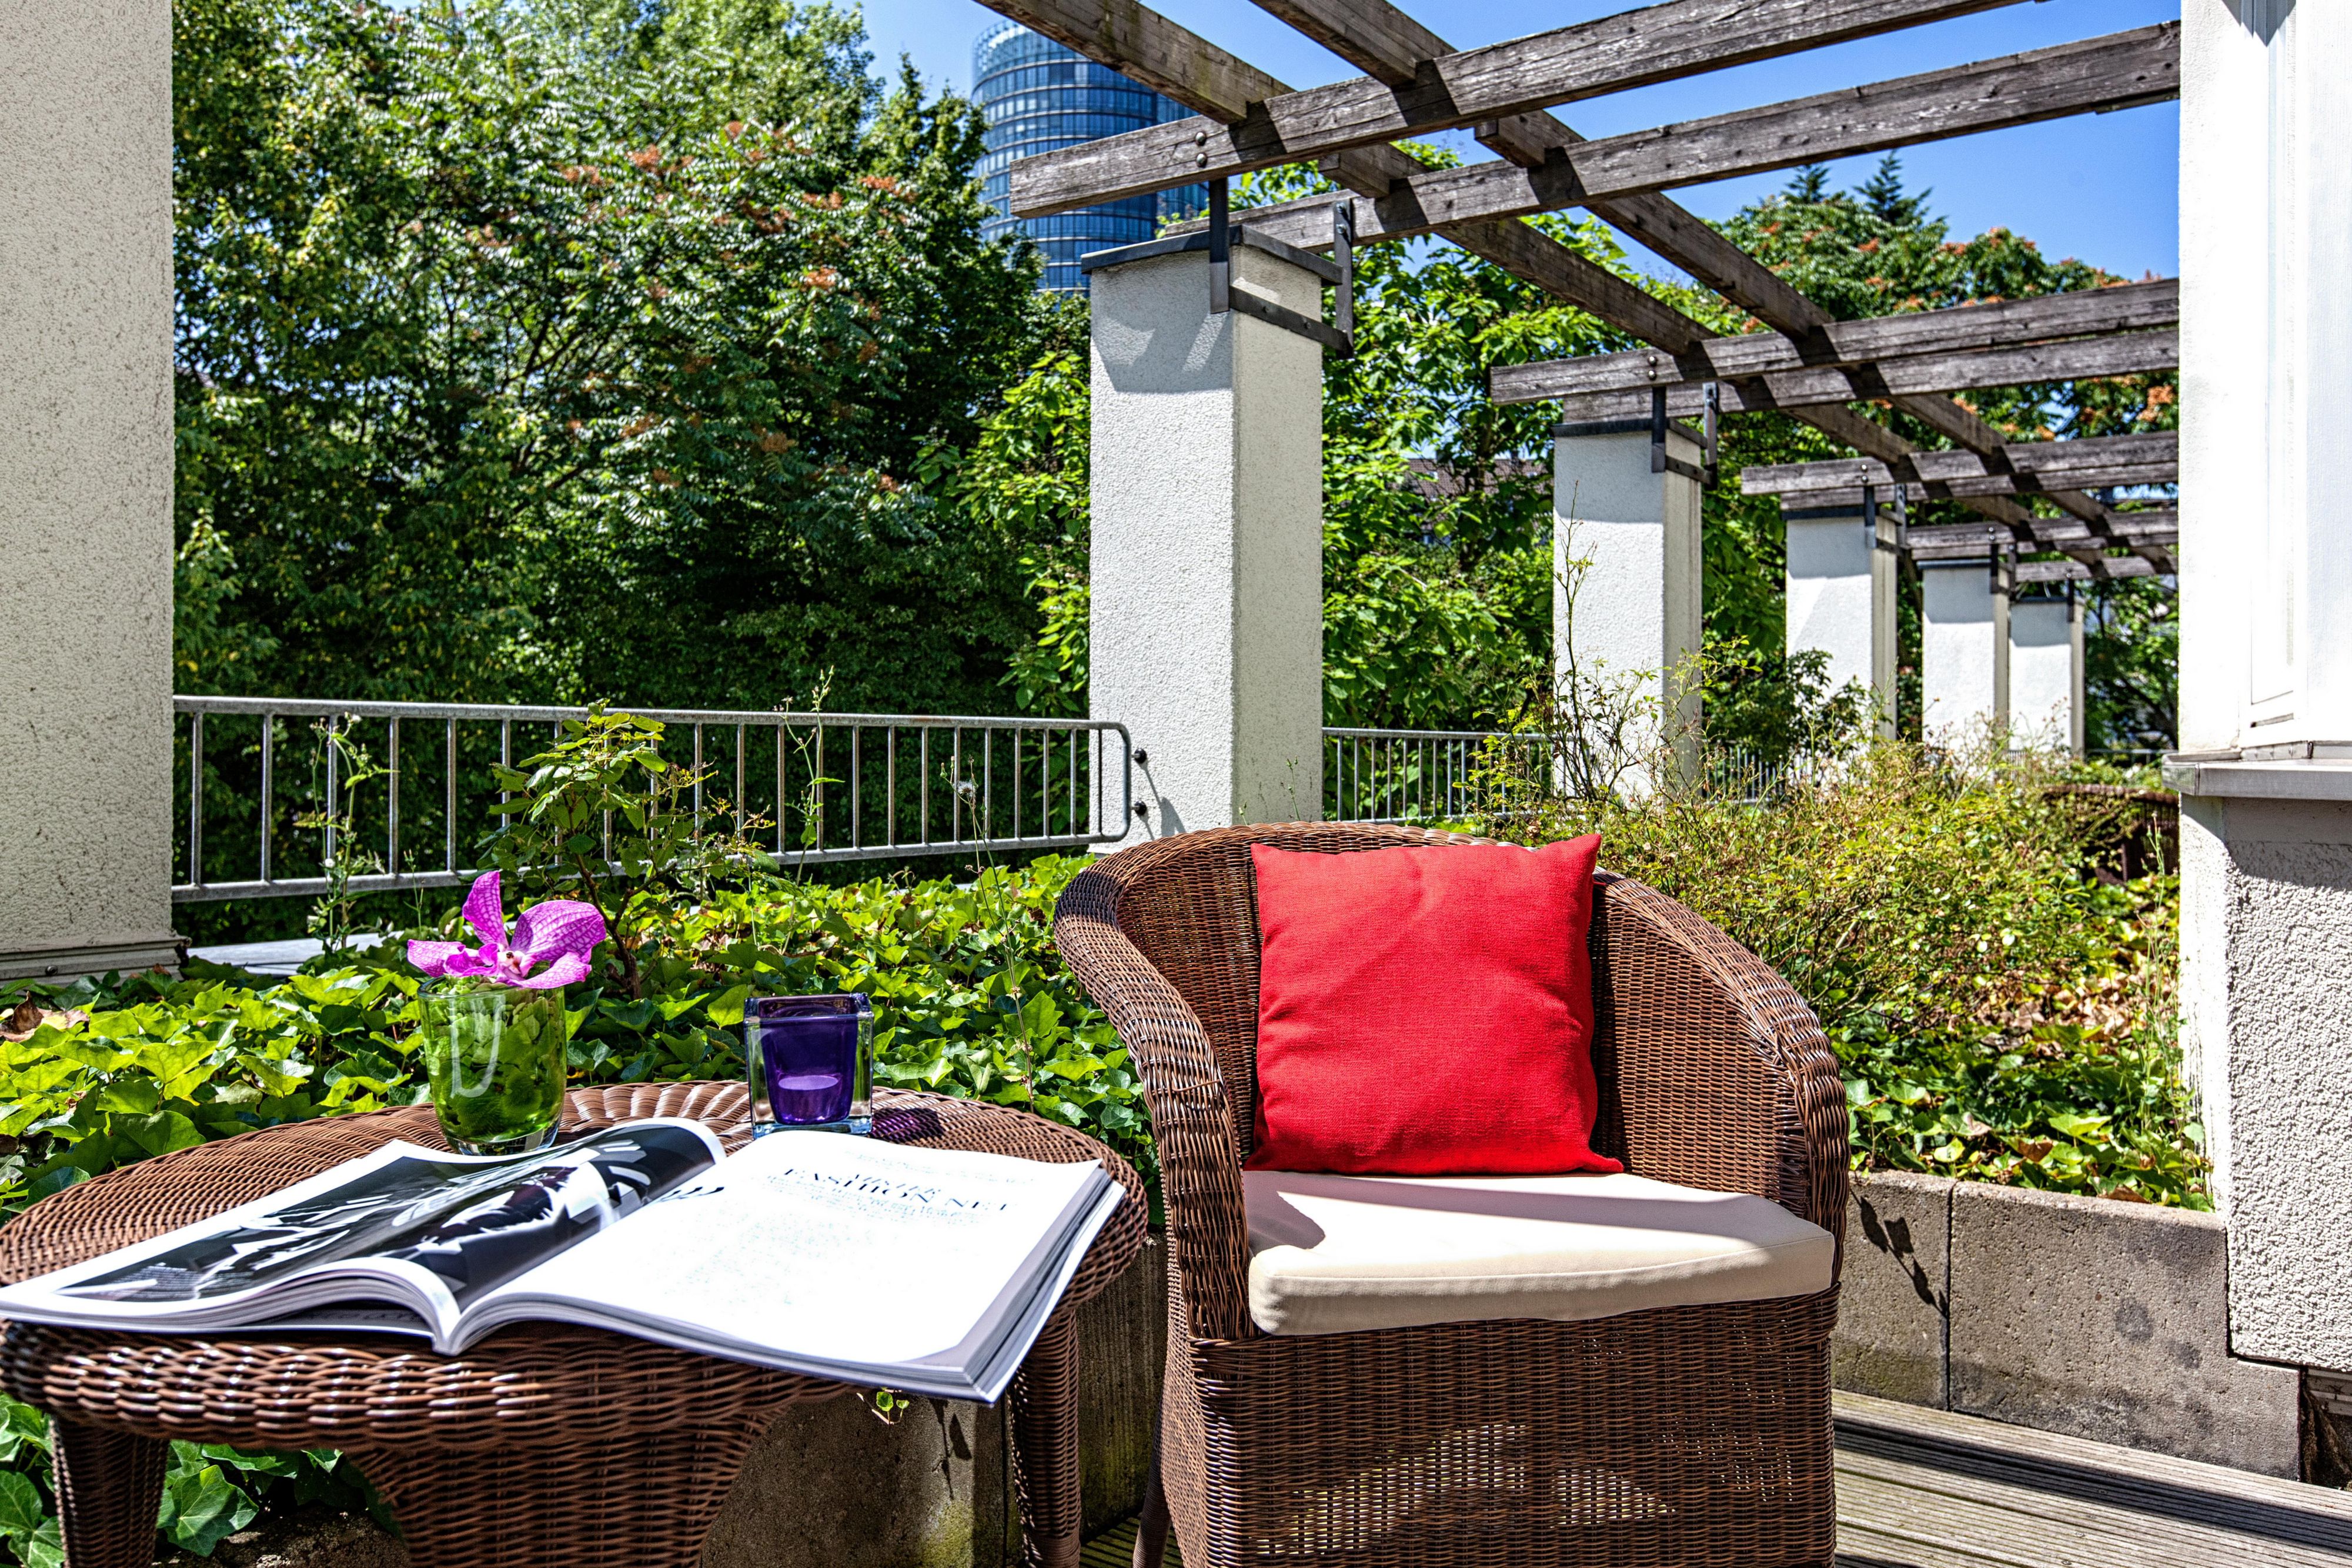 Step out to our beautiful outdoor terrace and enjoy the scenery and culture of Düsseldorf. Our terrace overlooks a scenic garden, creating a peaceful setting in the heart of Düsseldorf Pempelfort district – the place to be seen in the summer. We also have several rooms and suites with private terraces for dining, relaxing, and taking in city views.